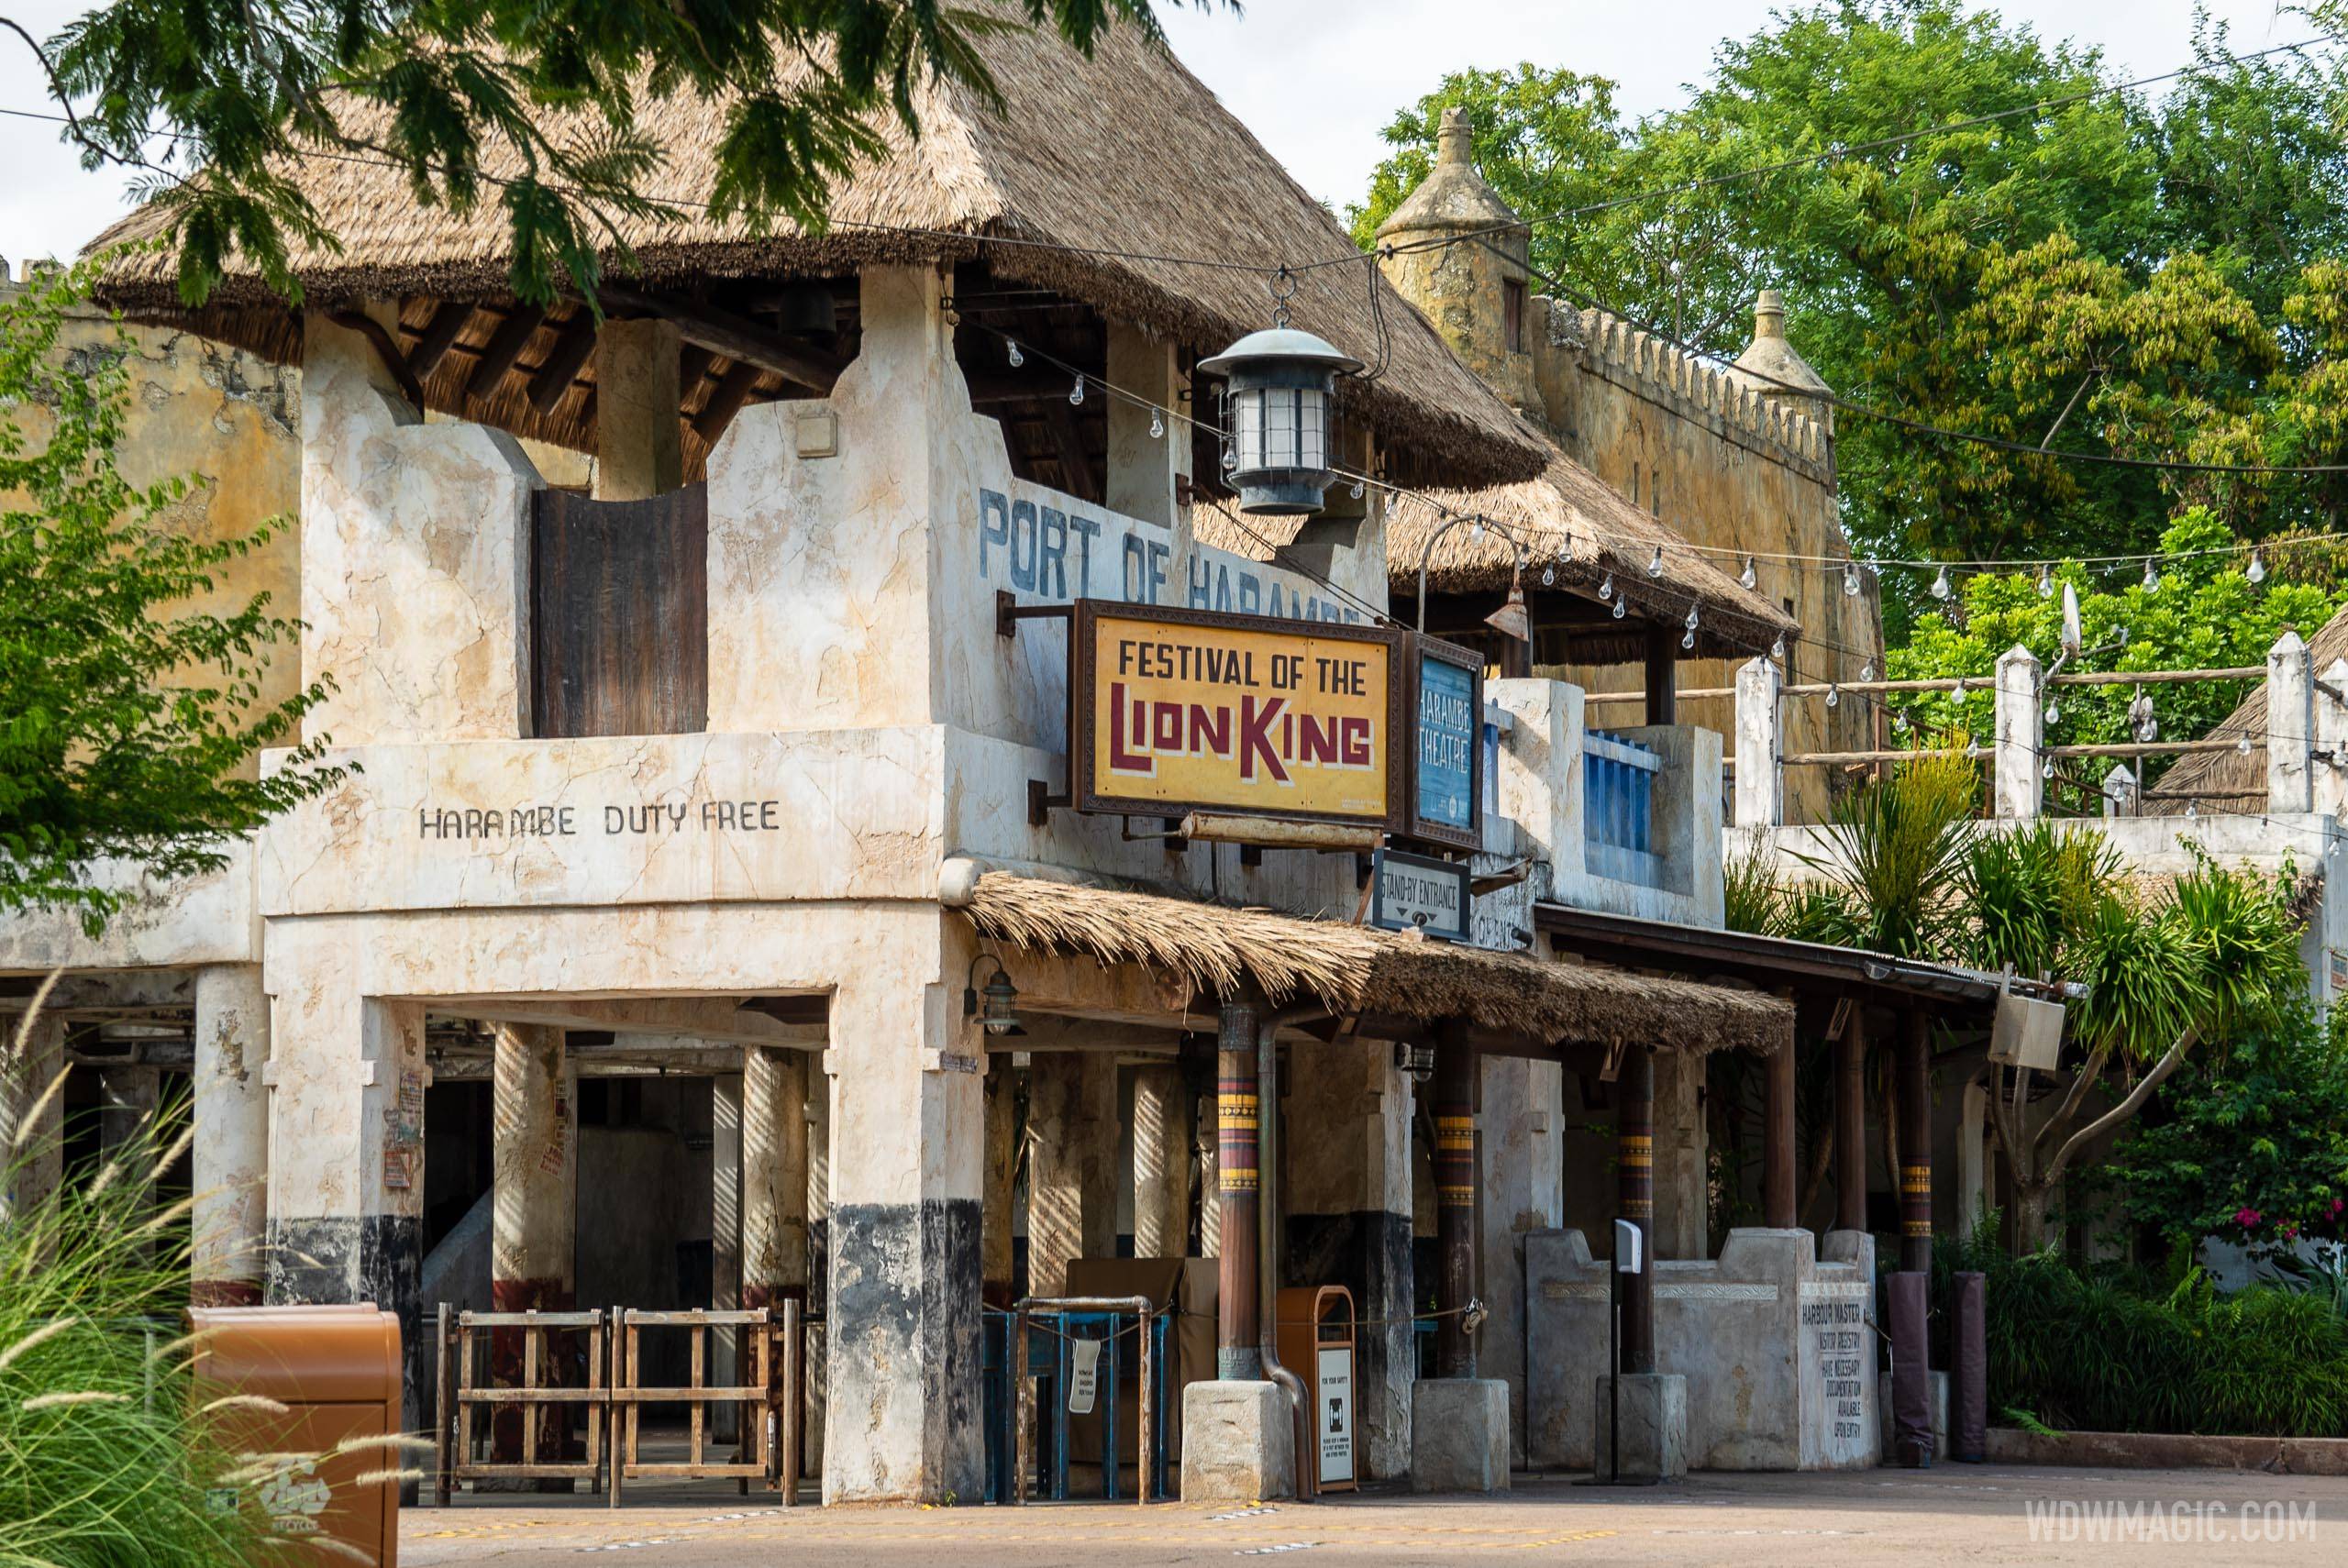 More performances of 'A Celebration of Festival of the Lion King' to begin soon at Disney's Animal Kingdom